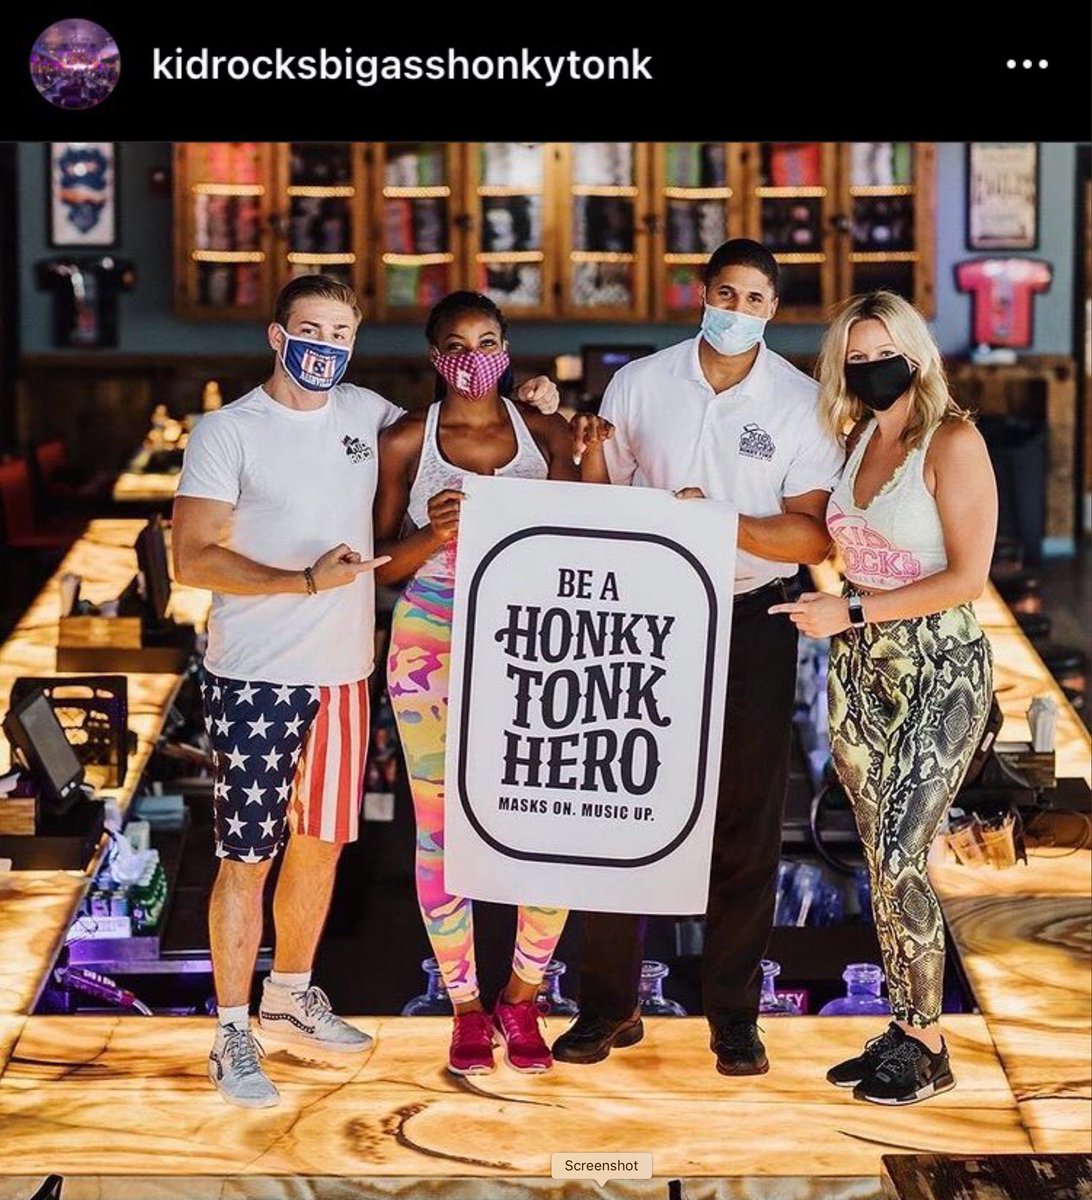 UPDATE: Eric Munchel may have taken a job at "Kid Rock's Big Ass Honkey Tonk" bar in Nashville, TN. This photograph from August 18, 2020 can be found on the bar's instagram account.